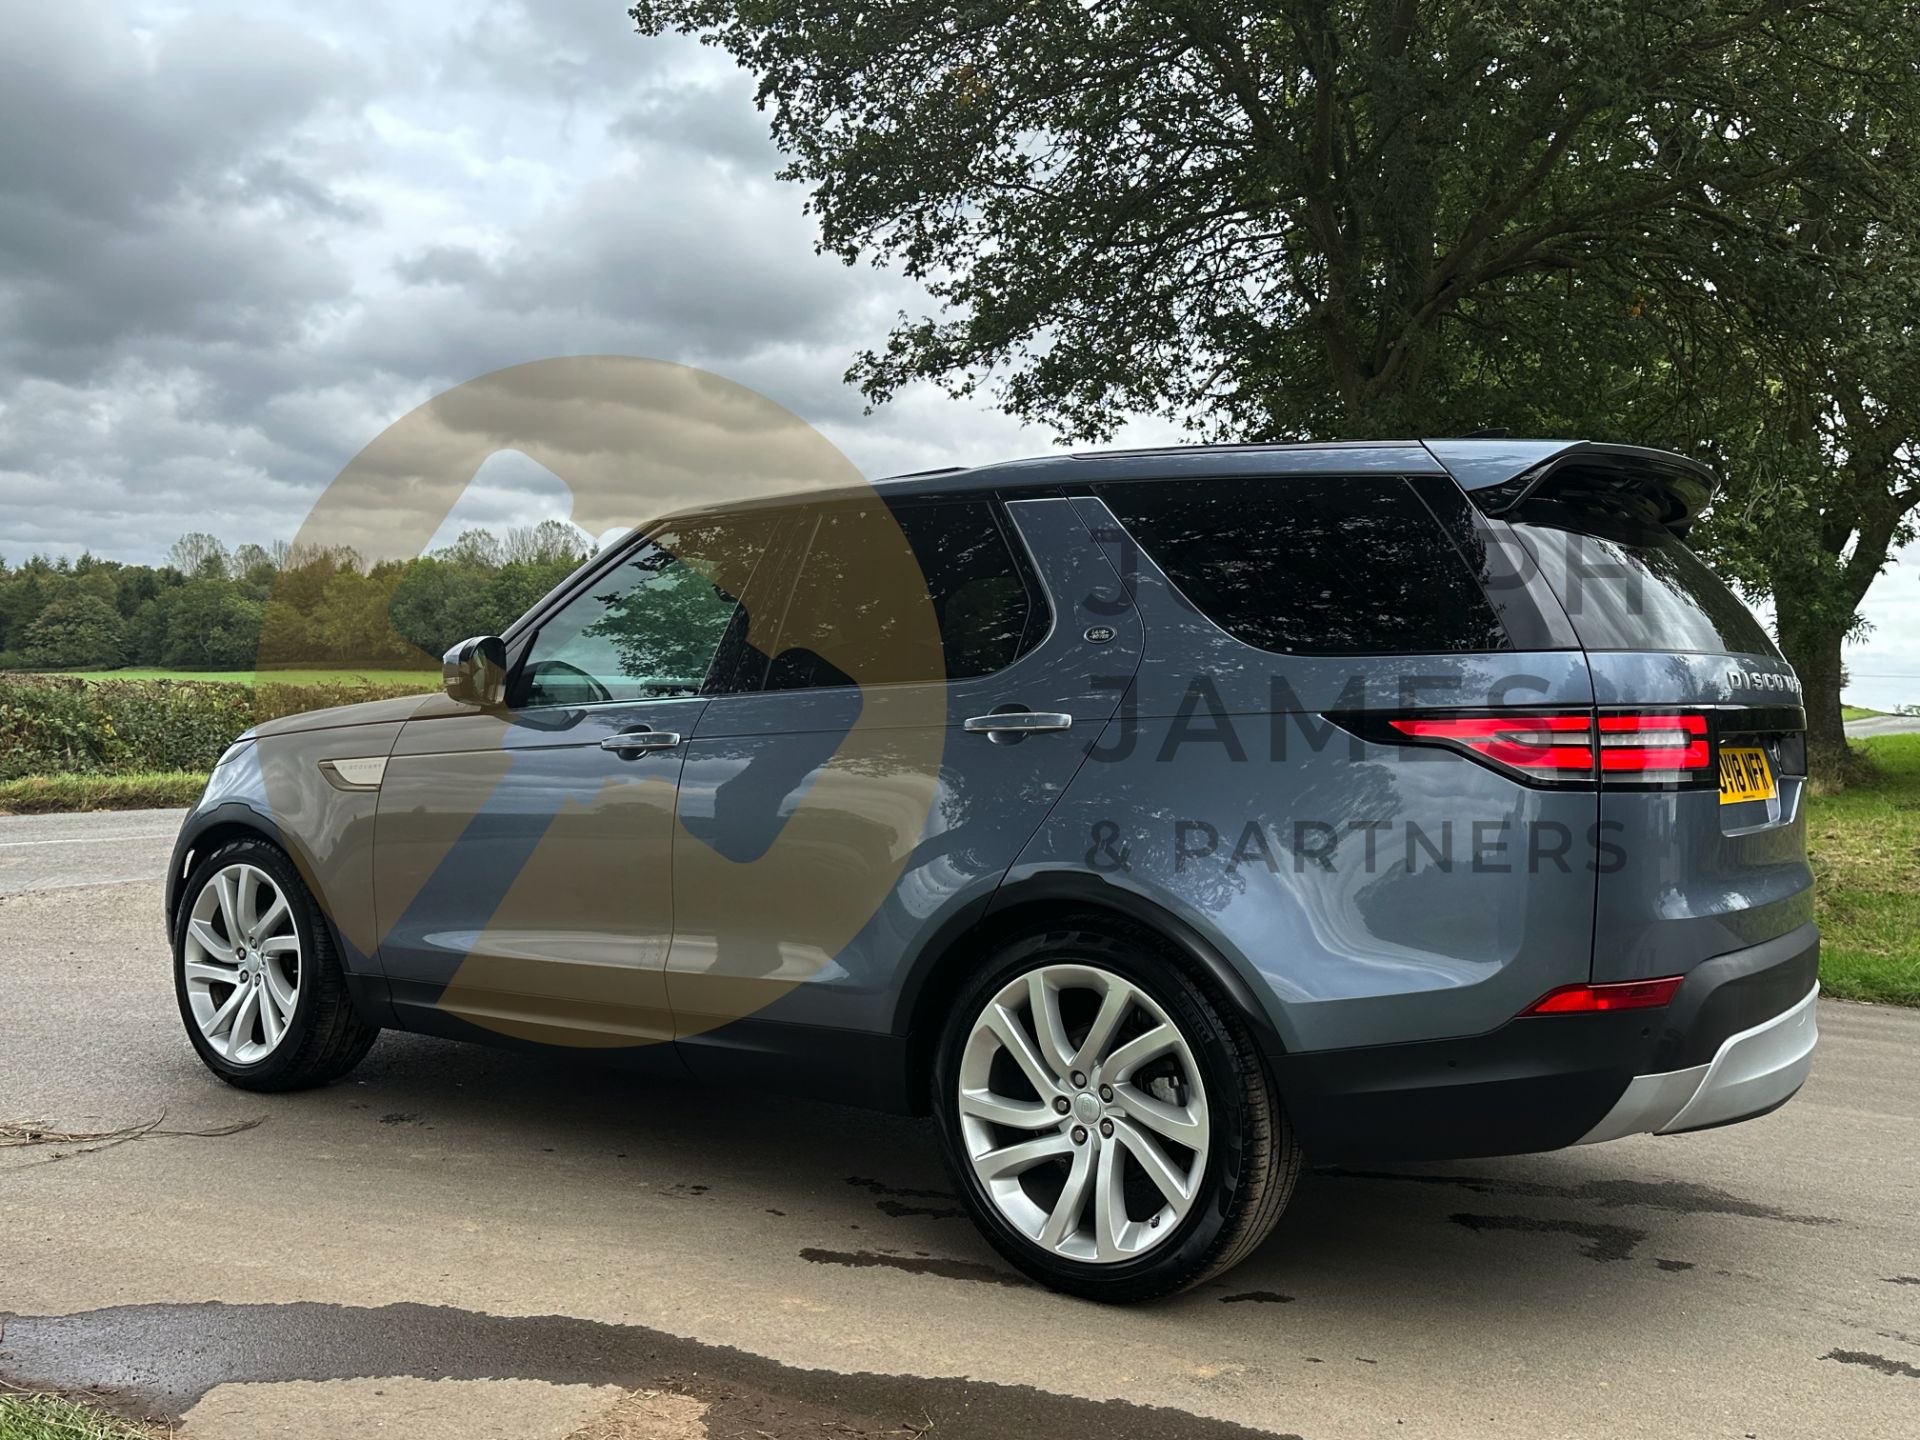 (ON SALE) LAND ROVER DISCOVERY 5 *HSE LUXURY* 7 SEATER SUV (2018 - FACELIFT MODEL) (LOW MILEAGE) - Image 9 of 66